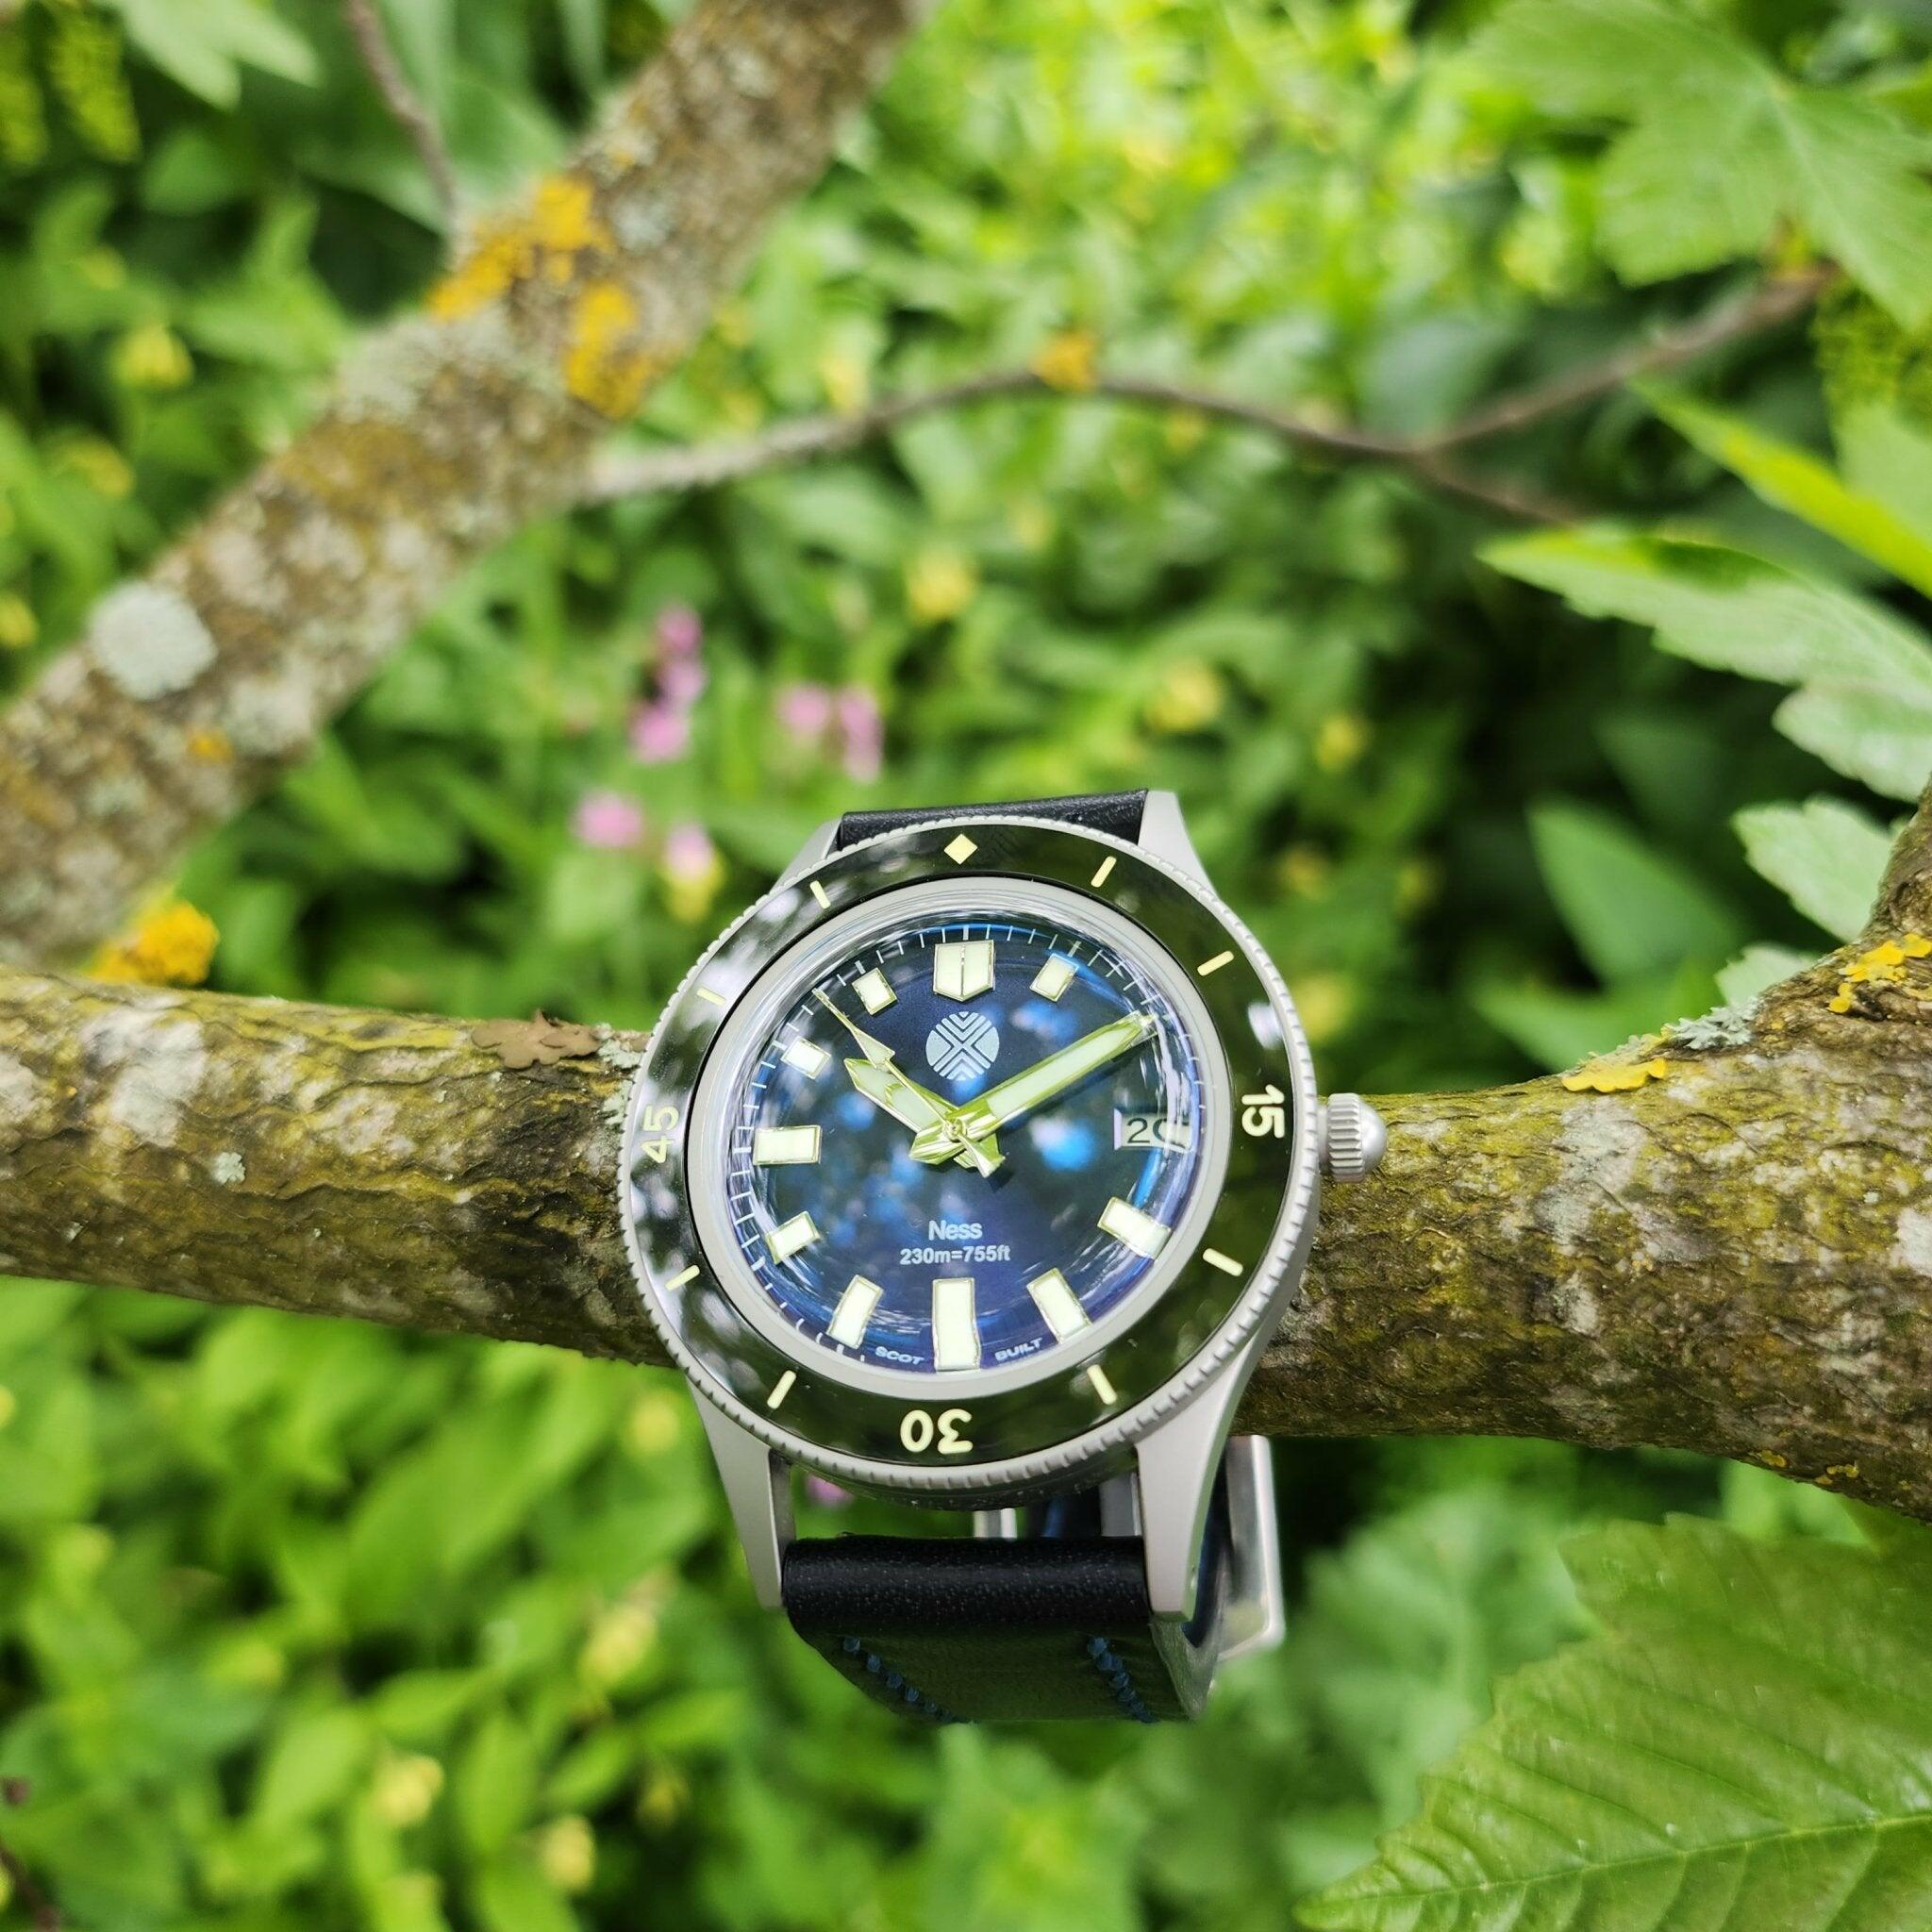 Crail - Ness Dive Watch - Founders Reserve Ltd Ed - Made in Scotland - The Classic Watch Buyers Club Ltd